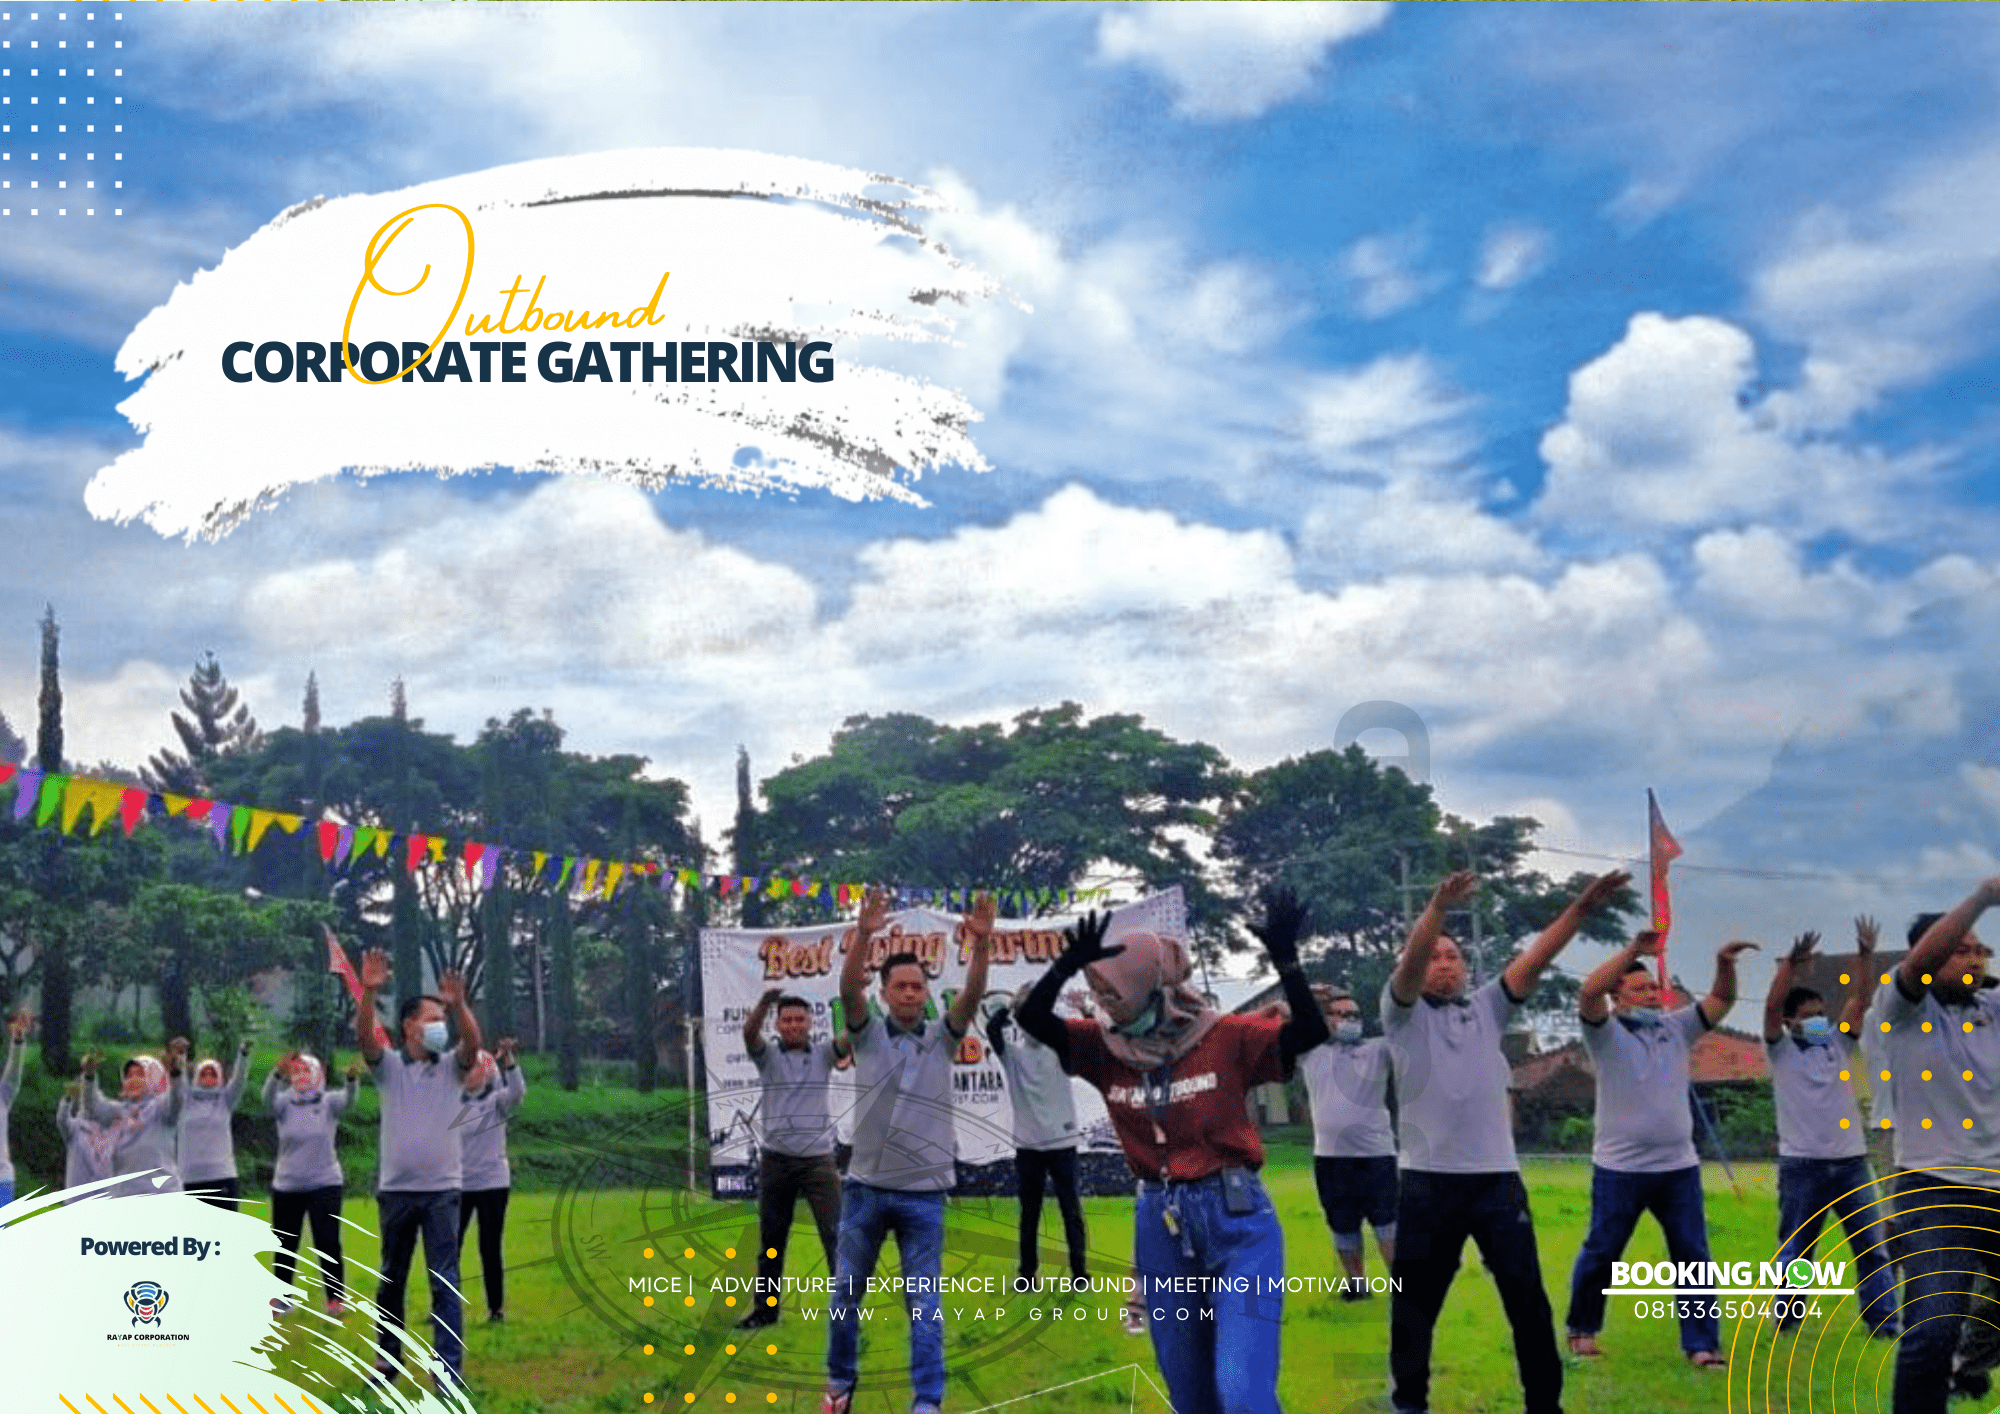 OUTBOUND CORPORATE GATHERING